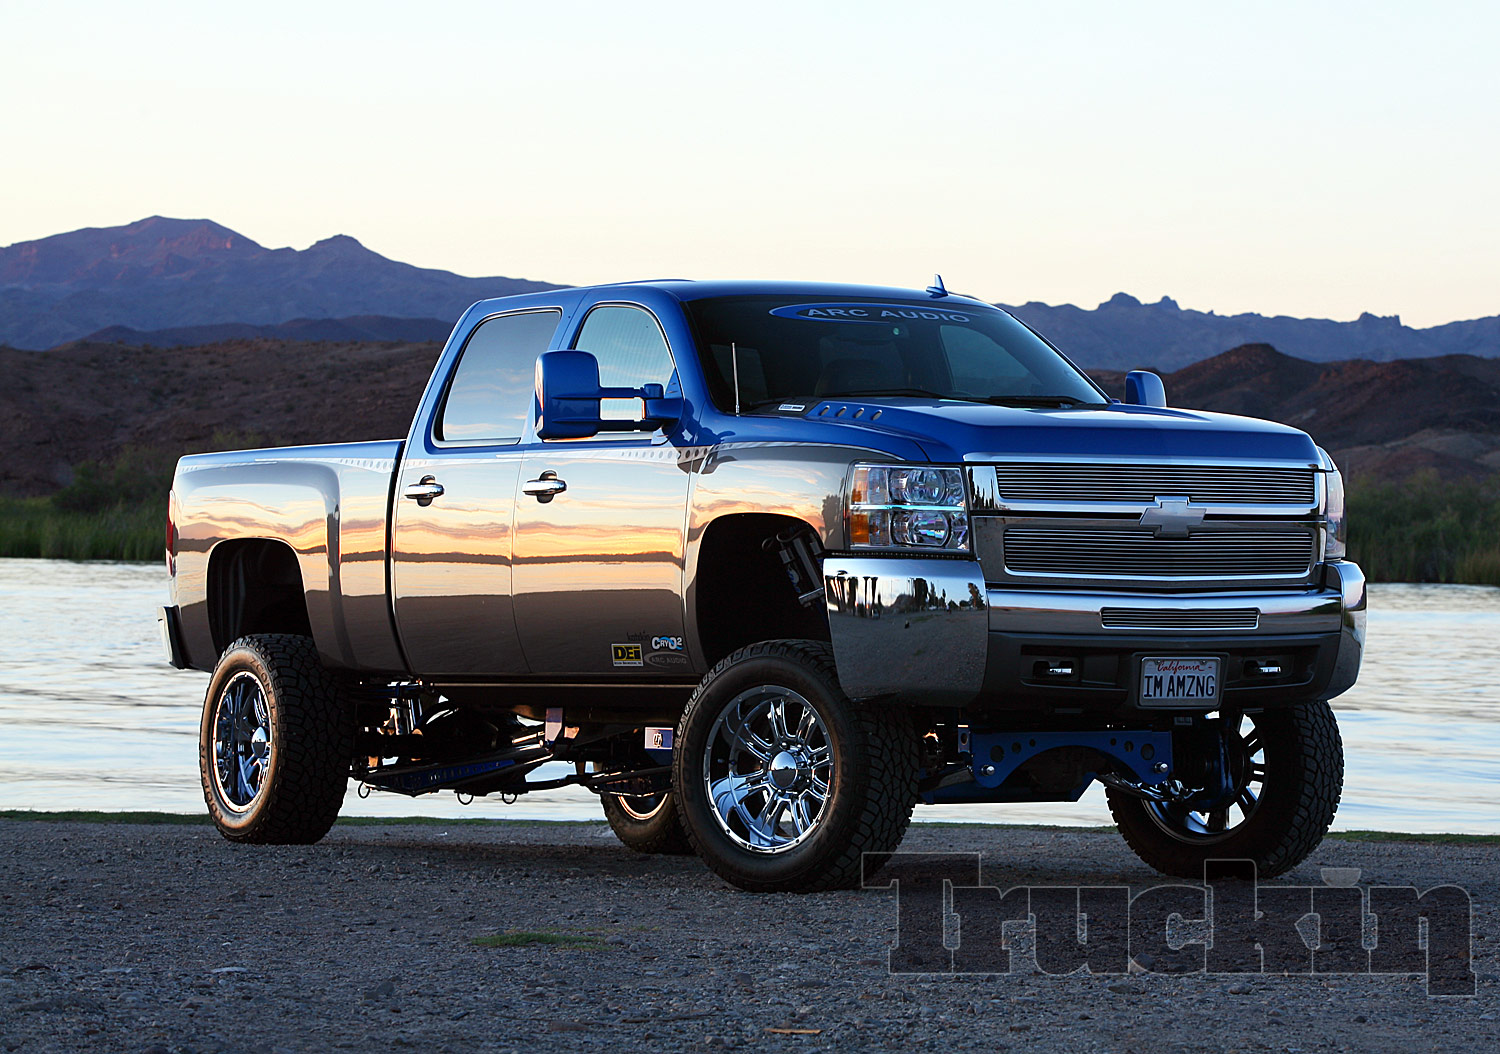 Lifted Chevy Truck Wallpaper Book Source for free download HD, 4K & high quality wallpaper